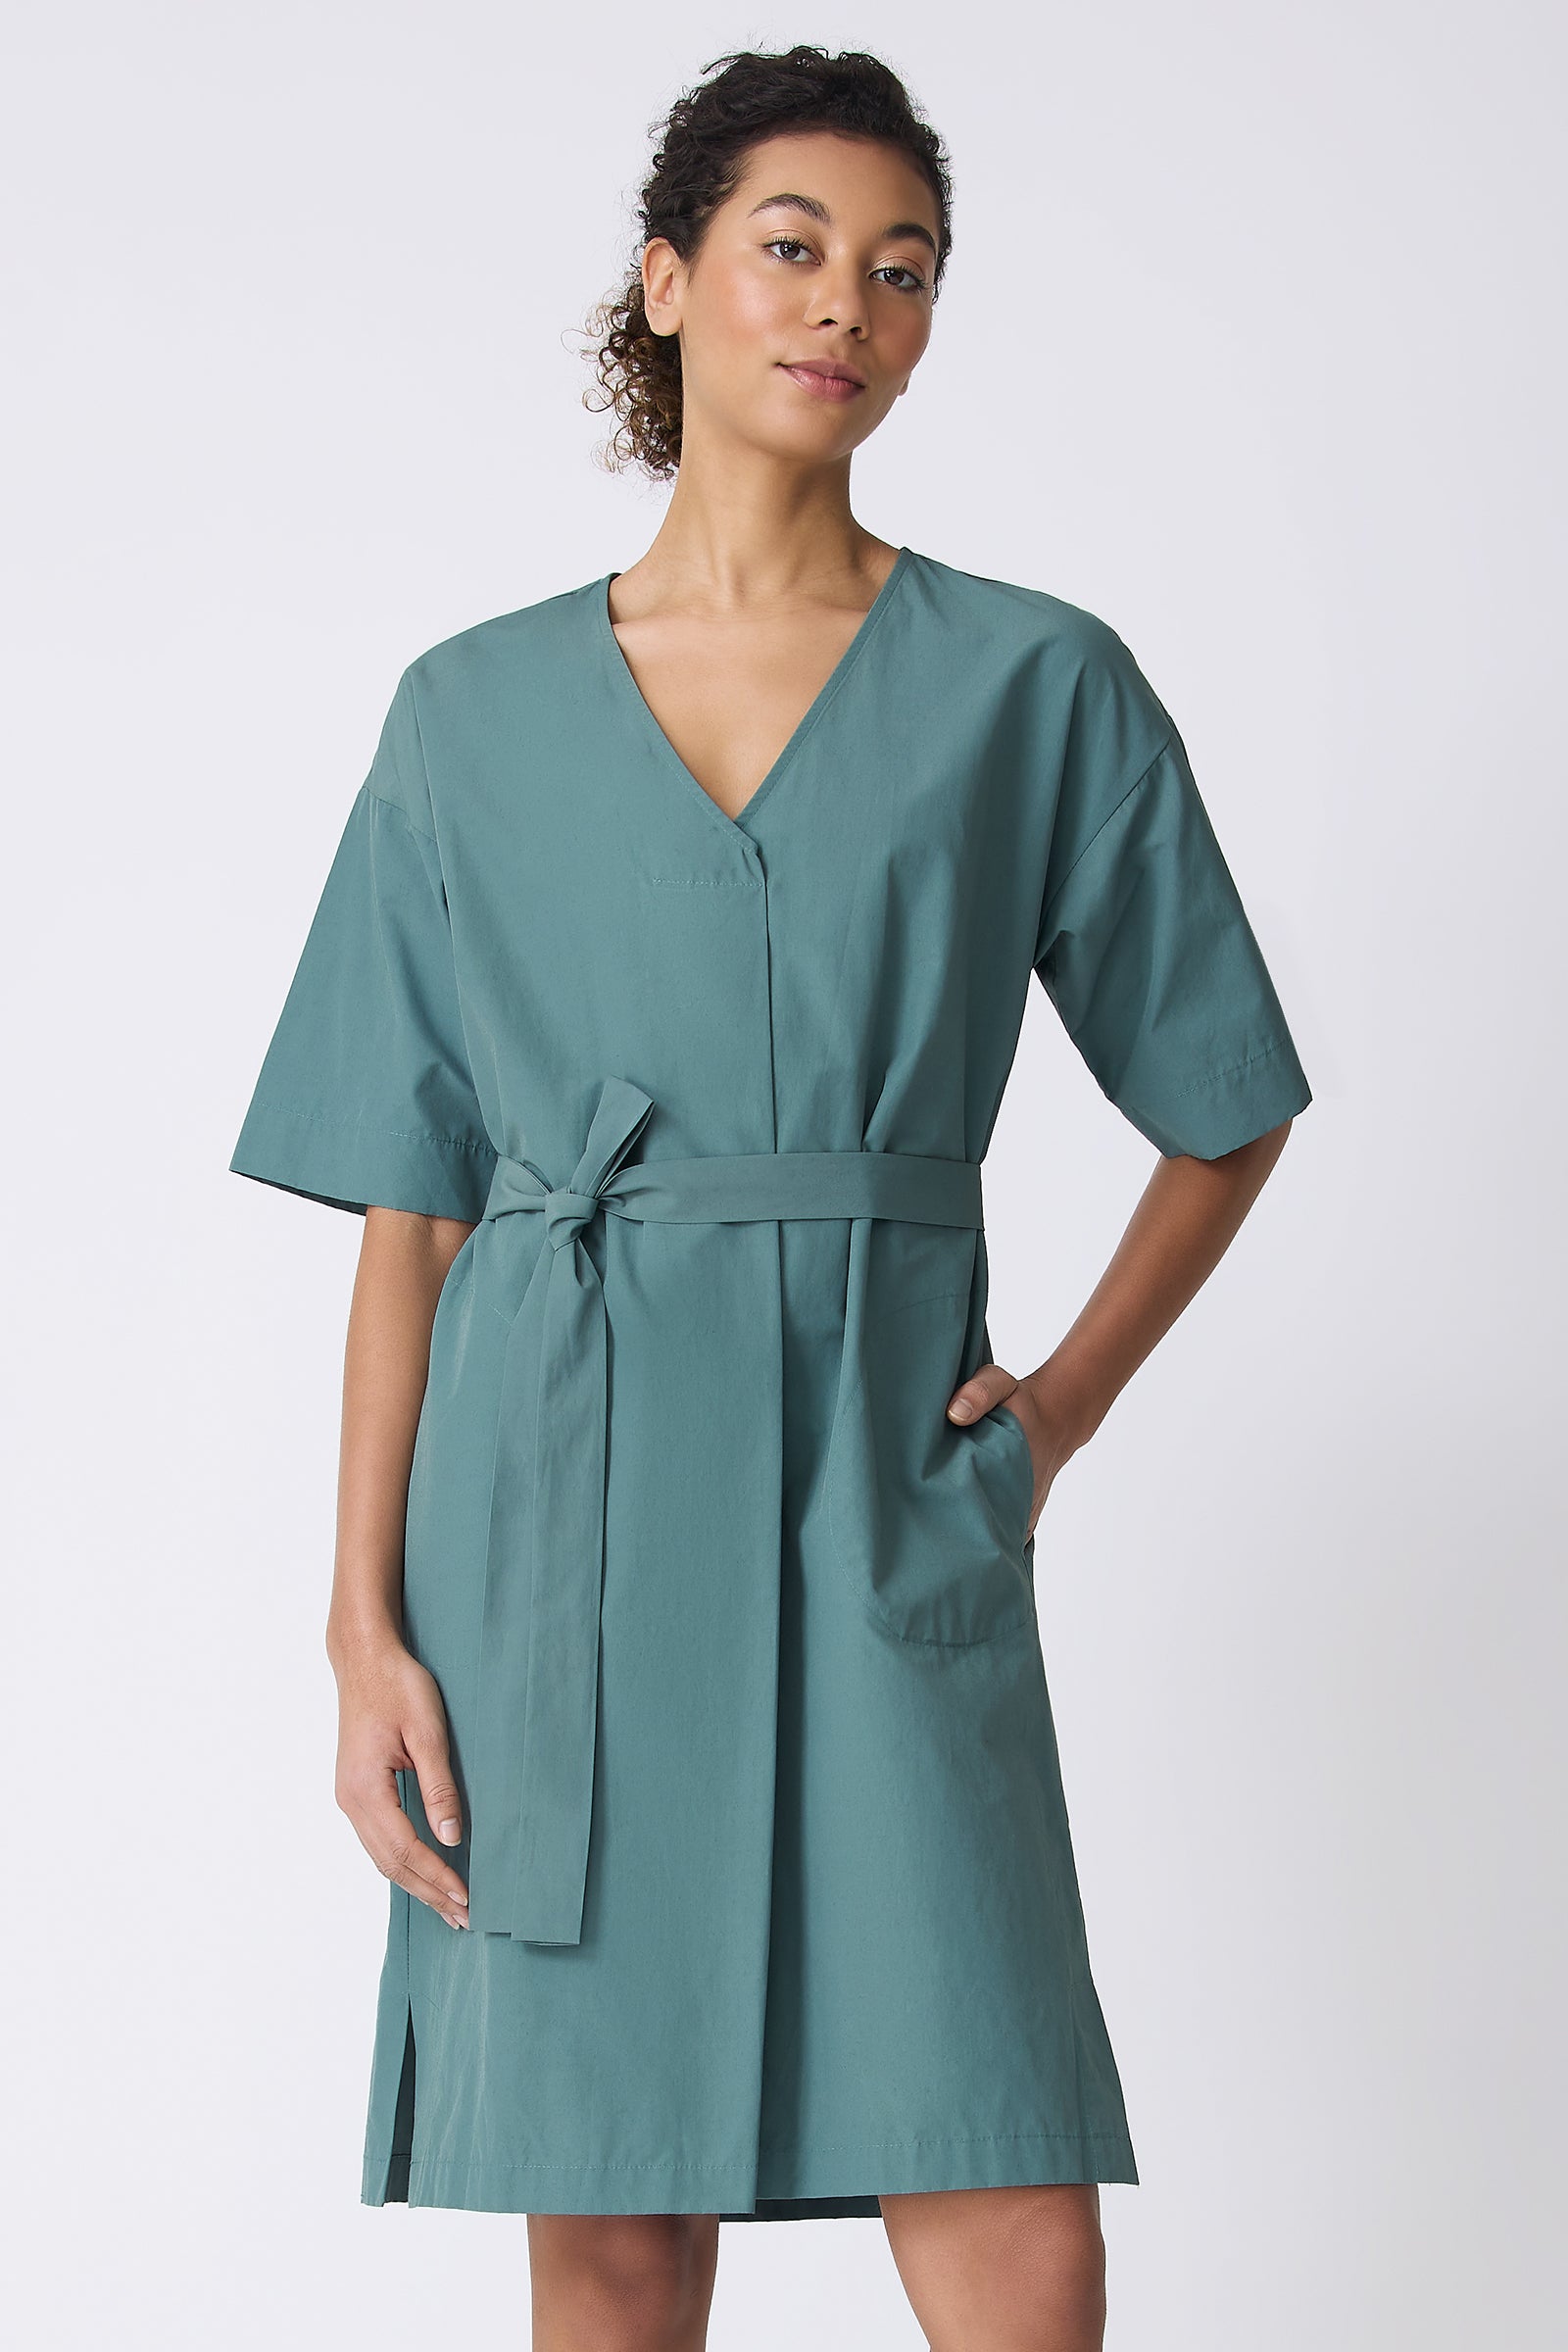 Kal Rieman Cara Fold Front Dress in Sage on model with hand in pocket front view